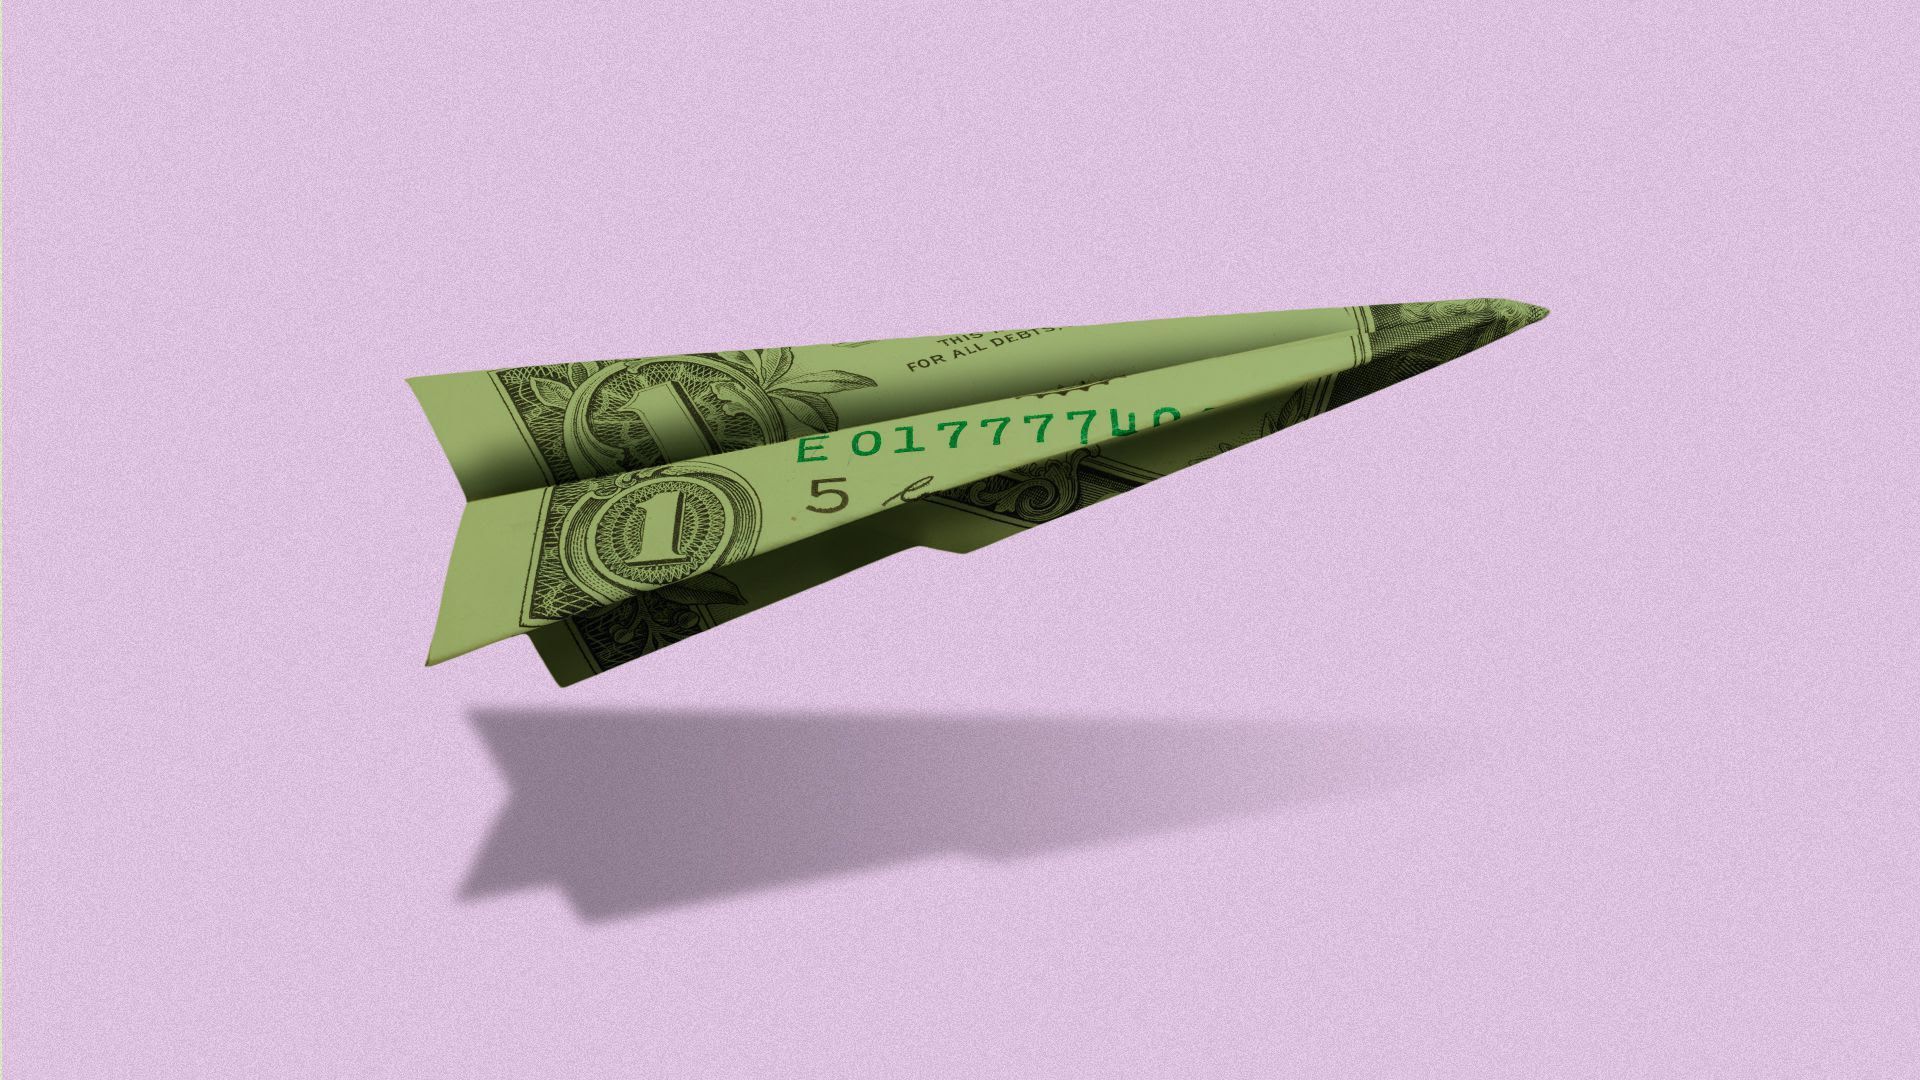 Illustration of a paper airplaine made of money